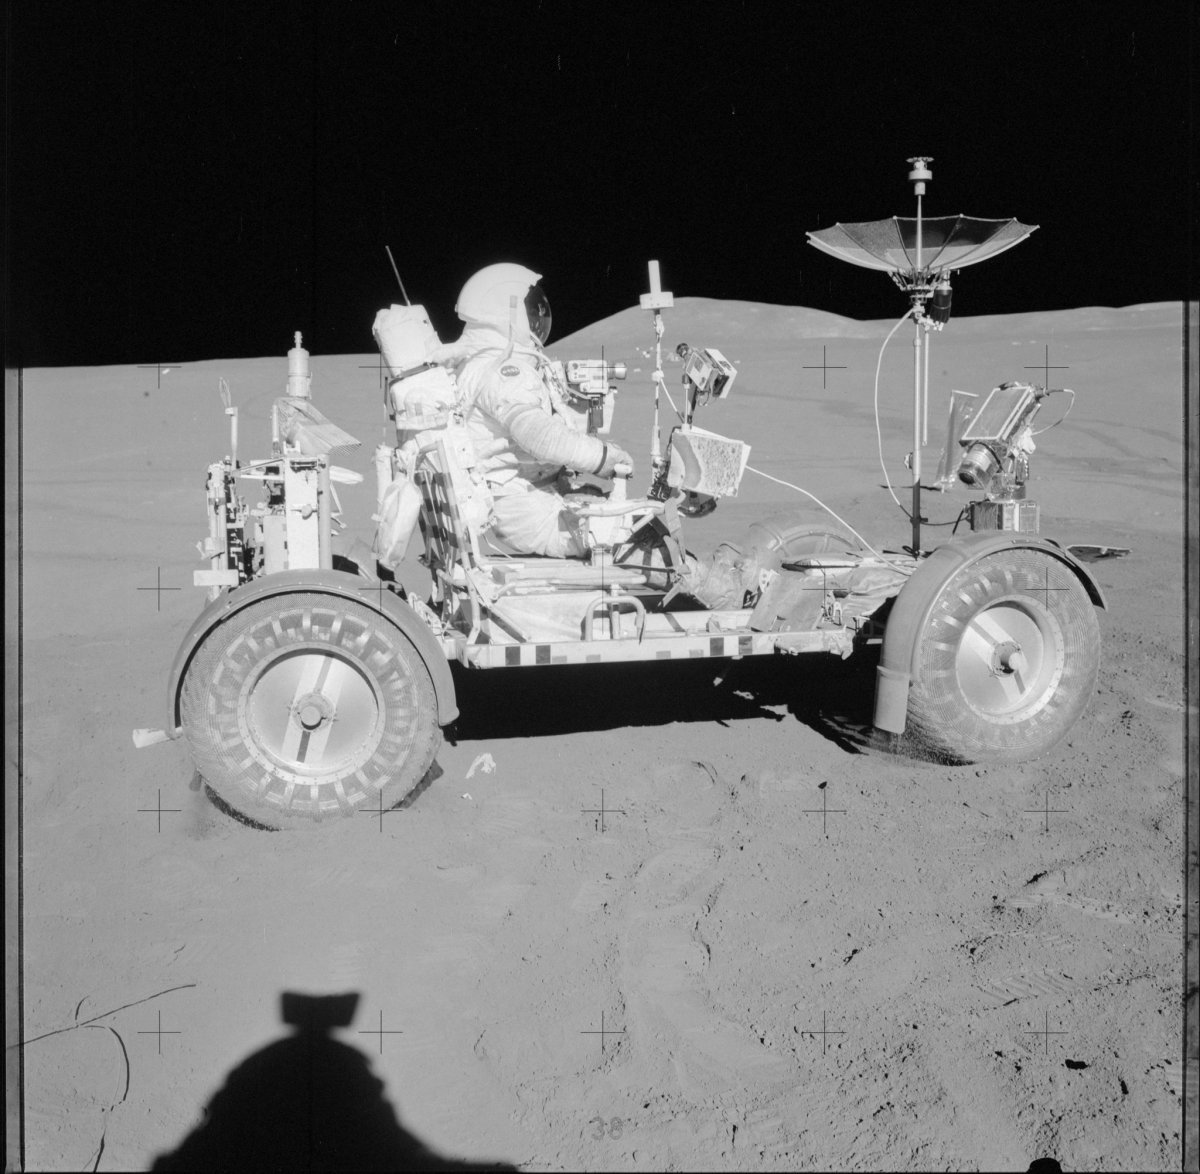 6 - Taking the lunar rover out for a ride